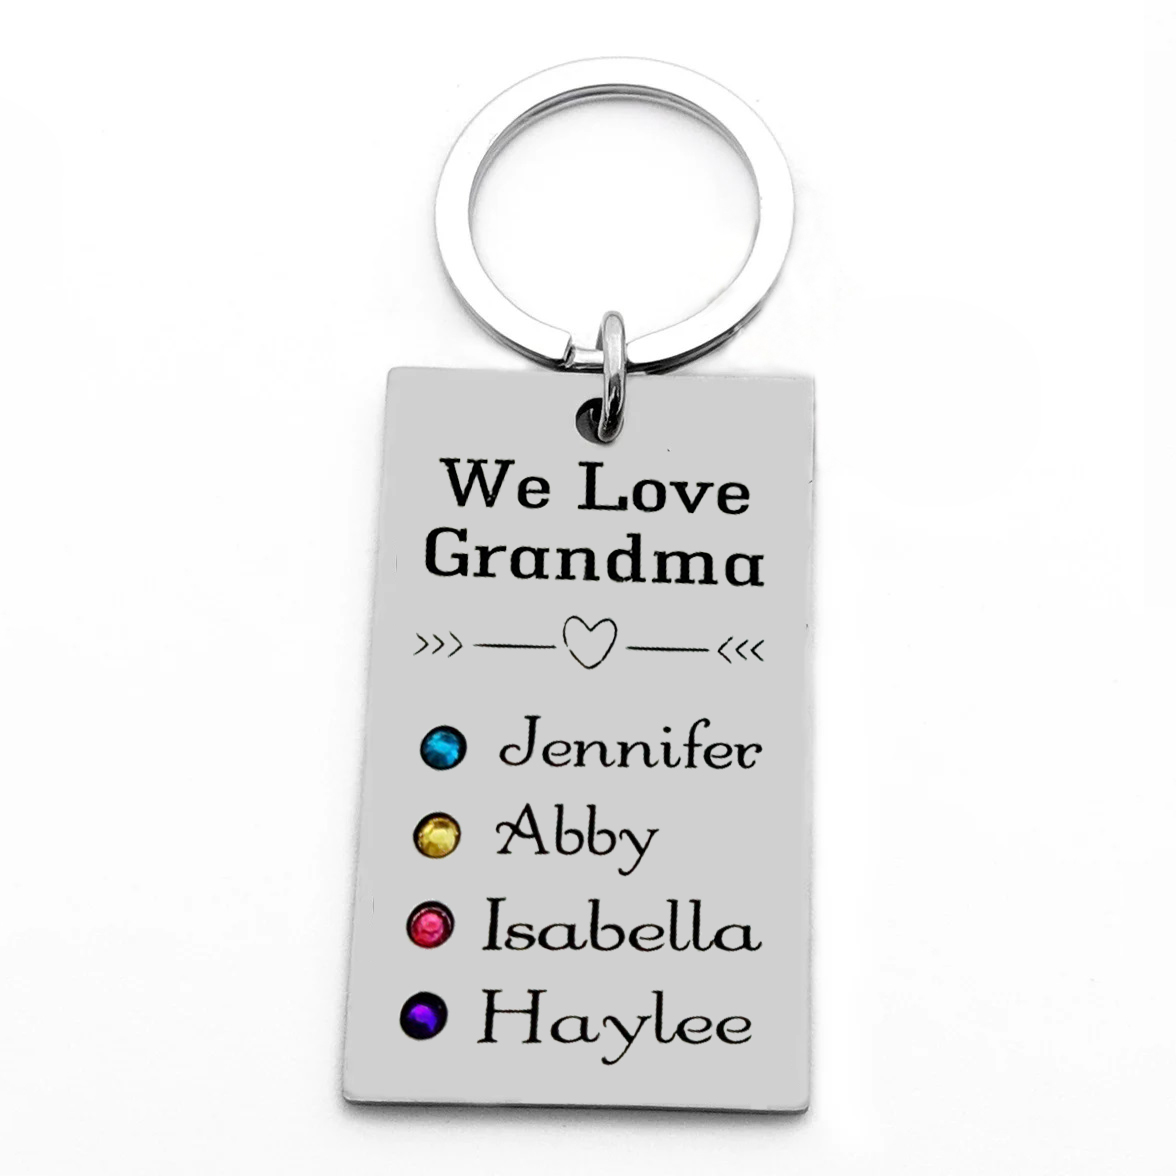 Personalized Family Keychain with 4 Birthstones Mother's Day Gift A We Love Grandma @ Jennifer o ?bby Isabella @ Havylee 